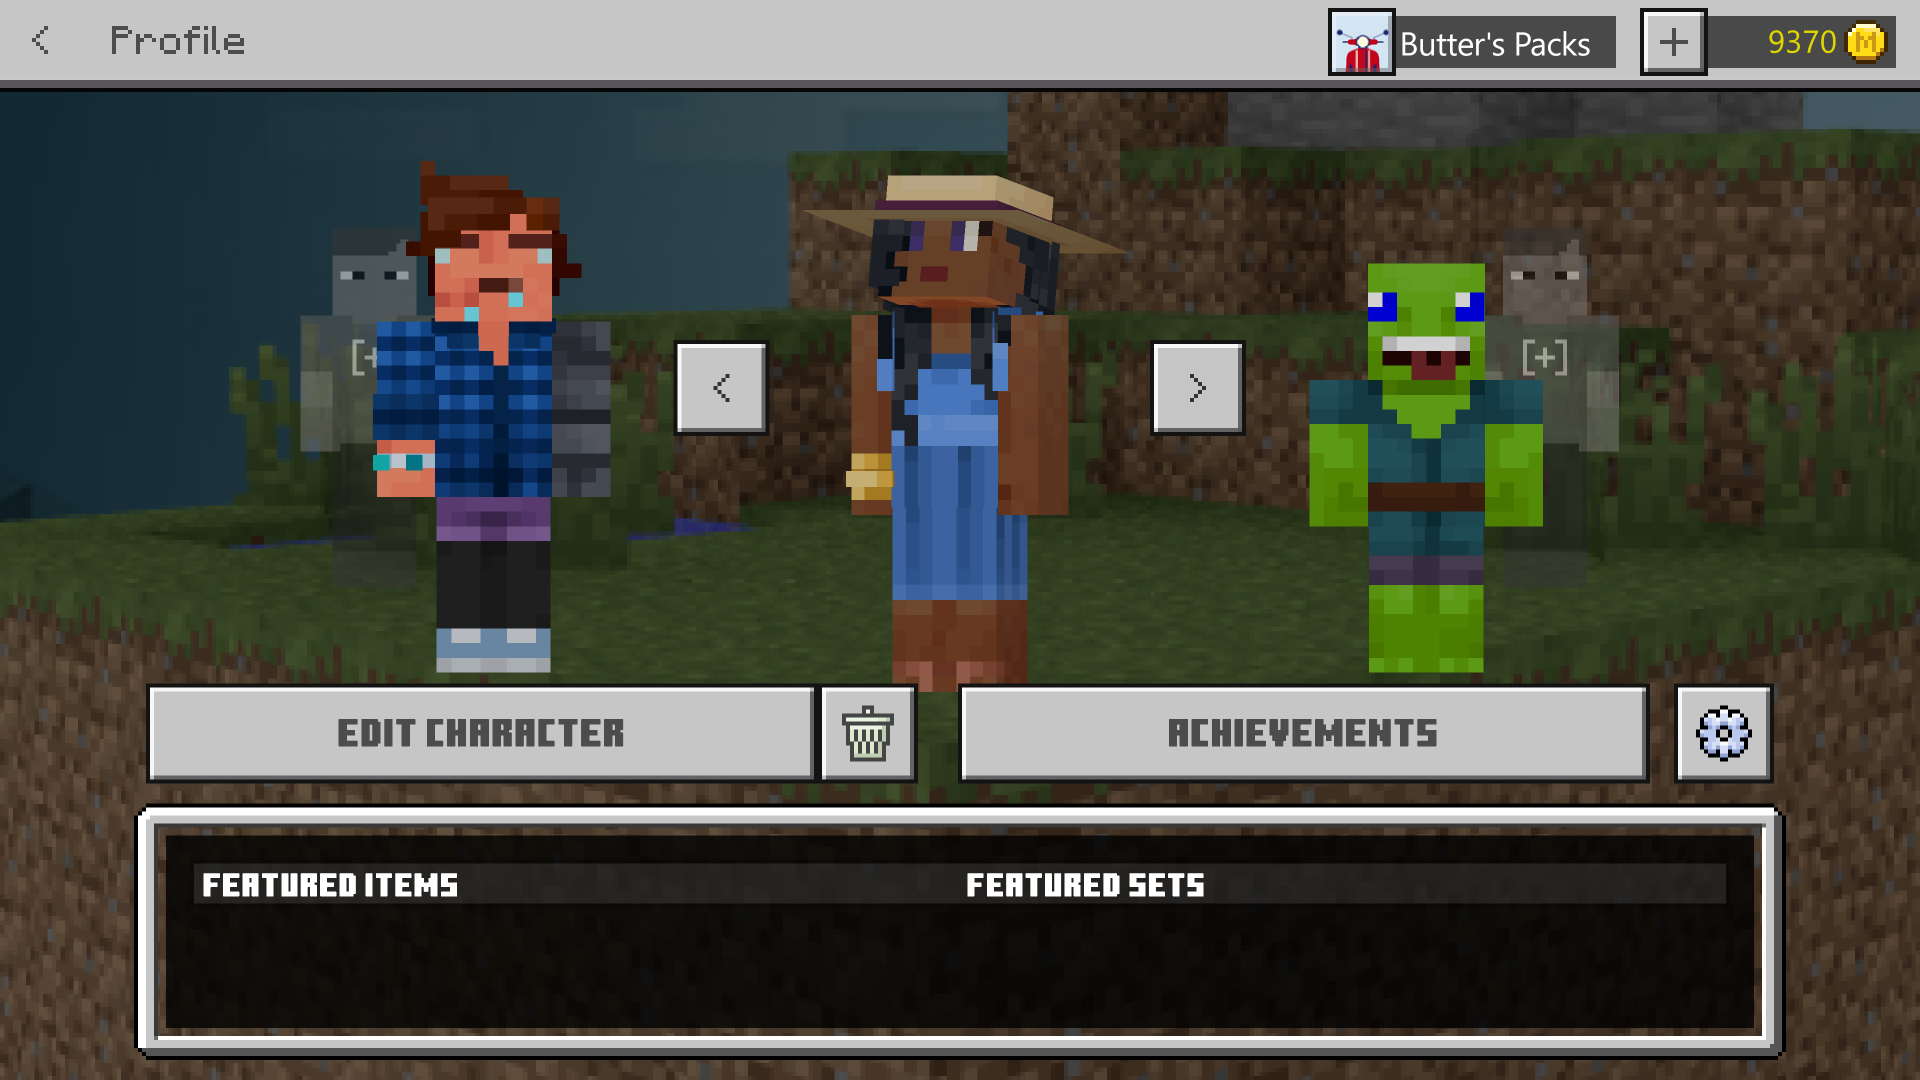 You can now create your own version of Minecraft